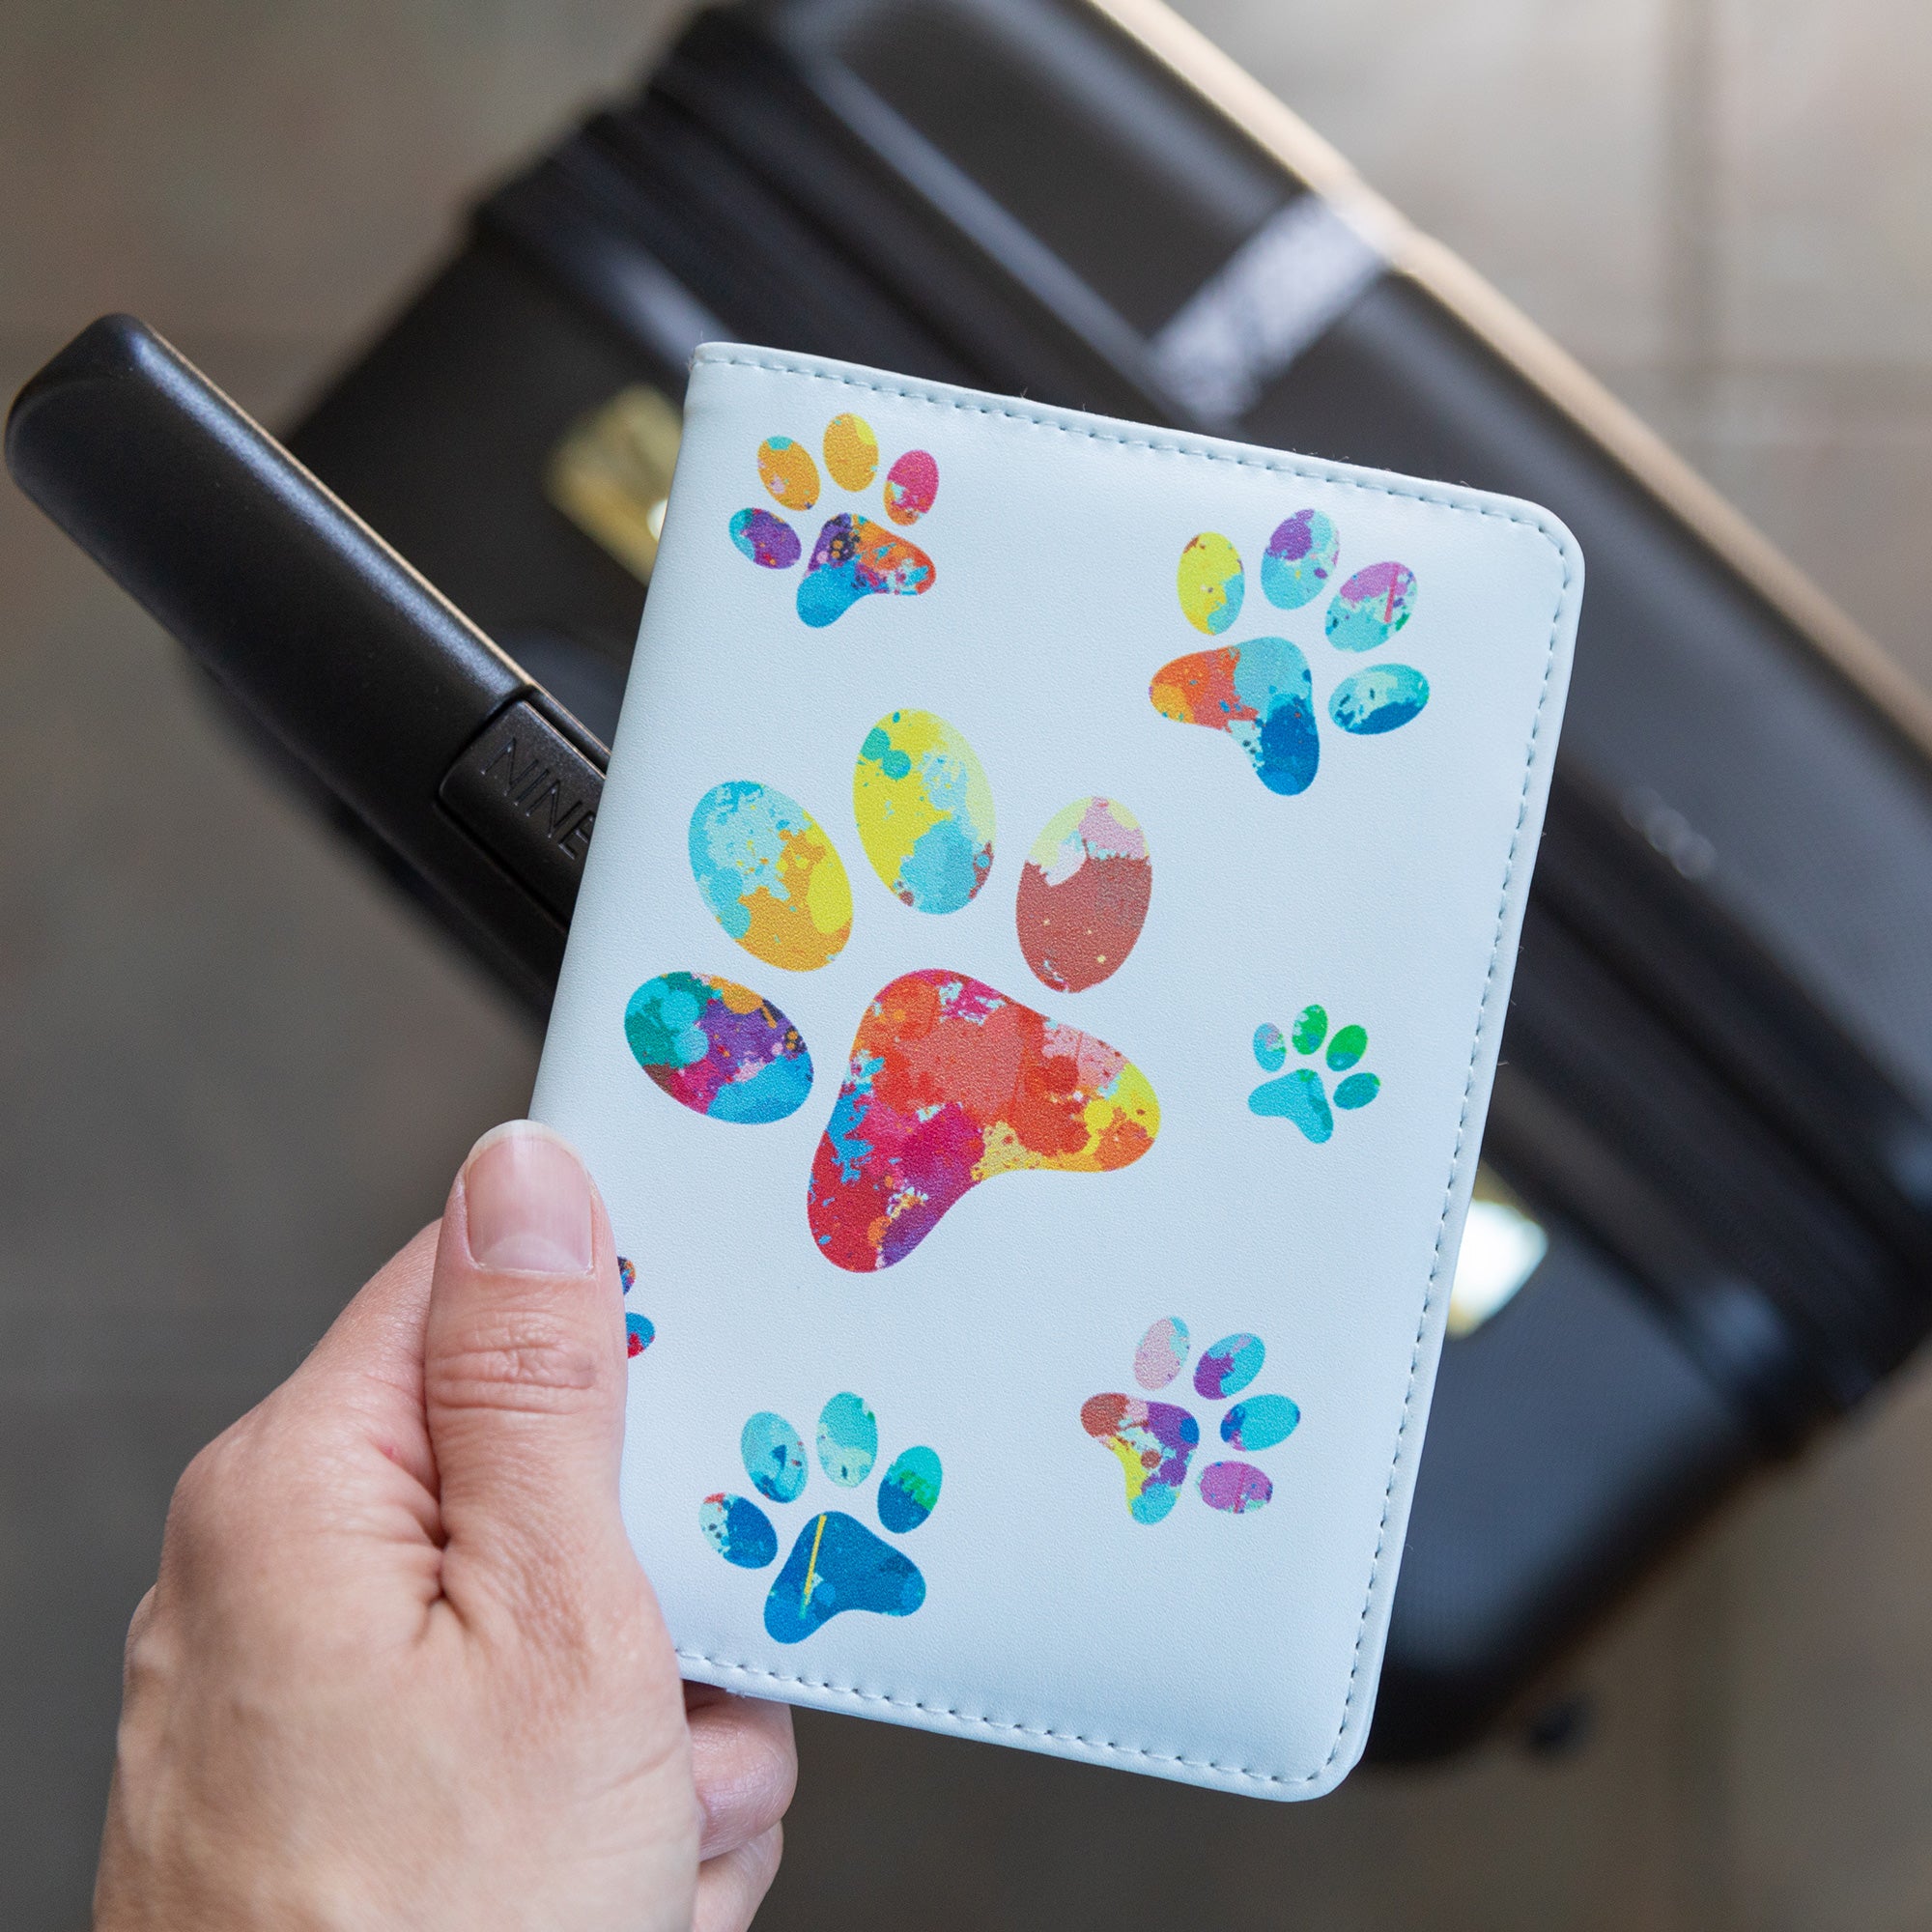 Pawsitively Time To Travel Luggage Tag & Passport Holder - Passport Holder